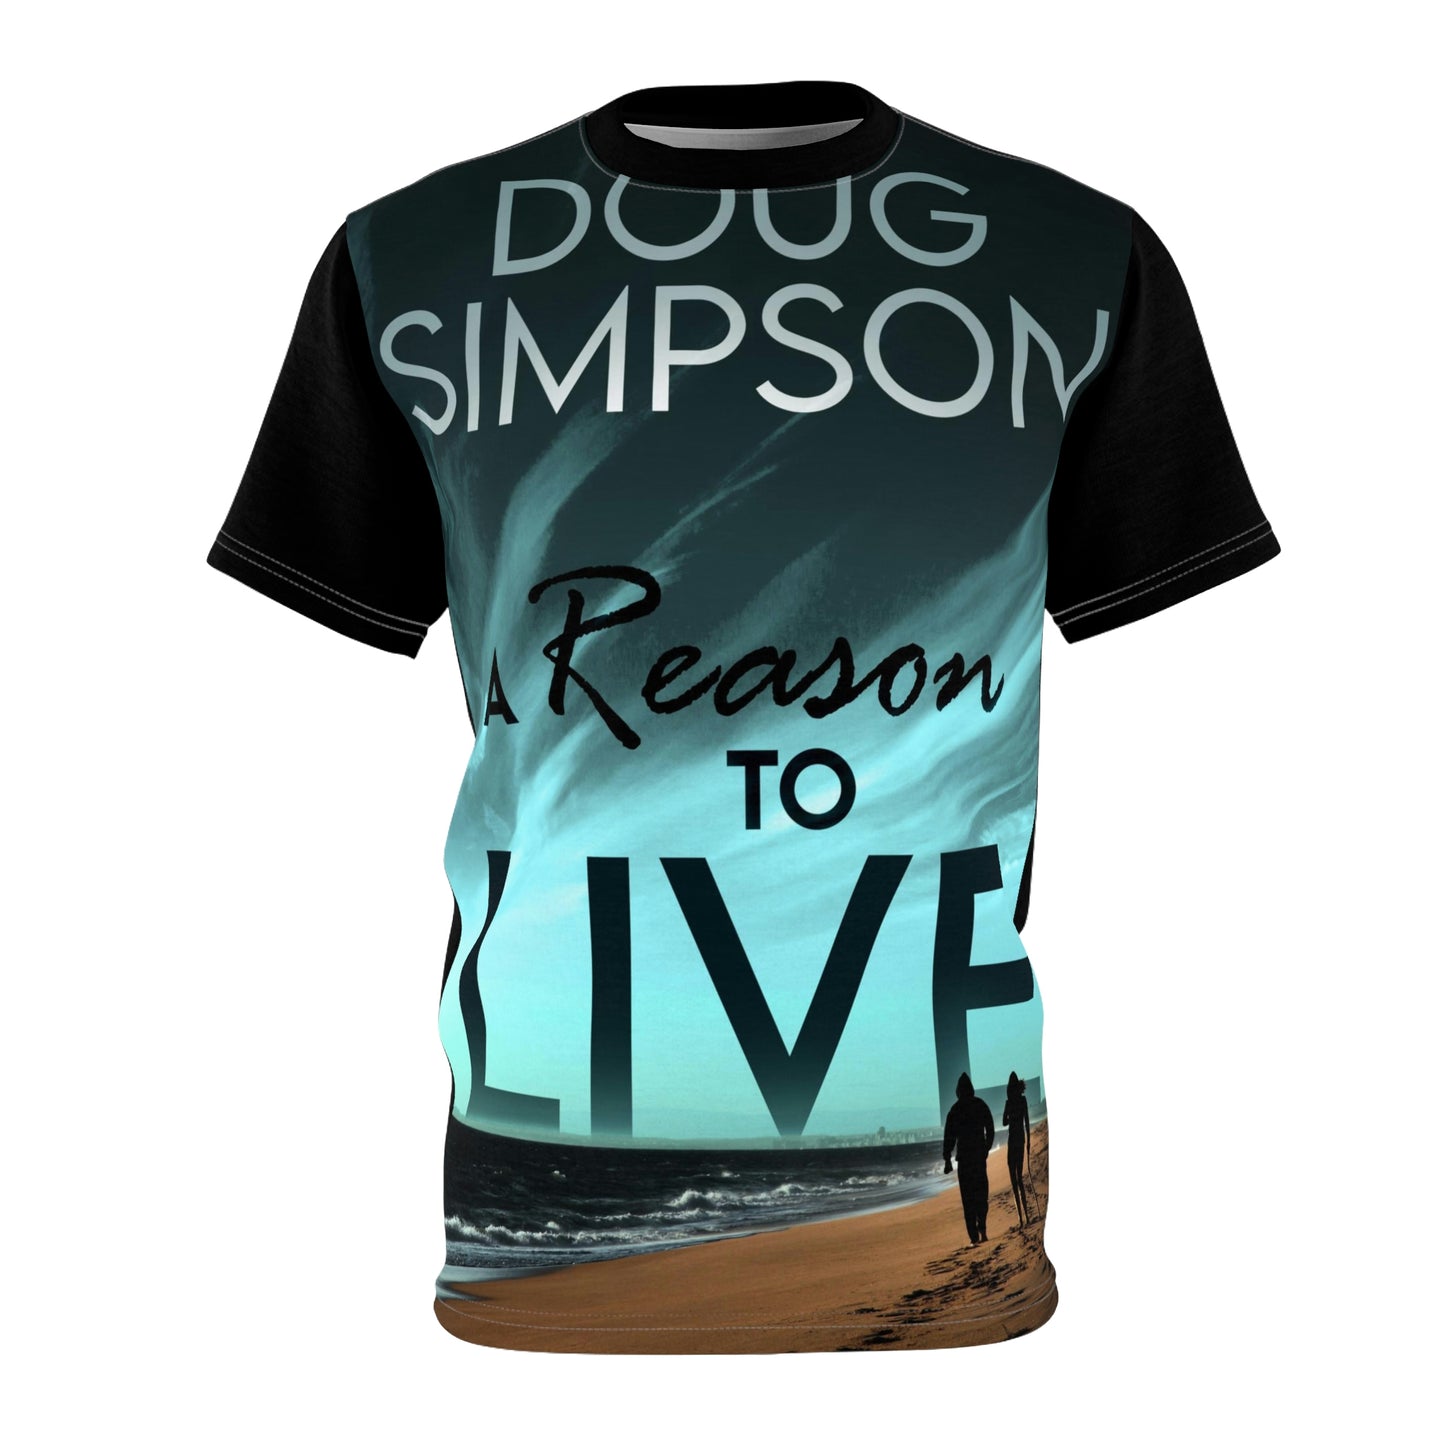 A Reason To Live - Unisex All-Over Print Cut & Sew T-Shirt